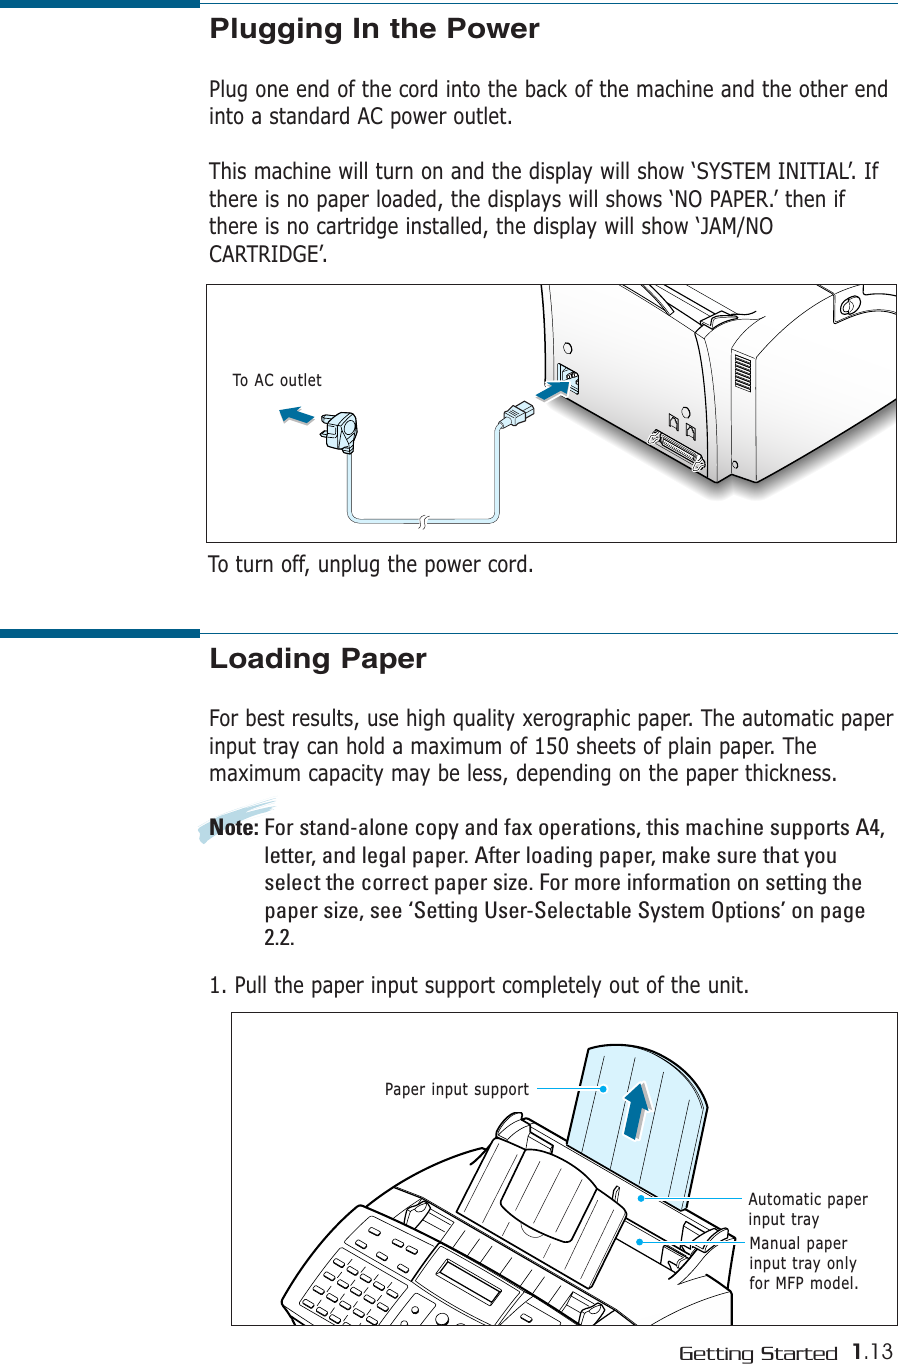 1.13Getting StartedLoading PaperFor best results, use high quality xerographic paper. The automatic paperinput tray can hold a maximum of 150 sheets of plain paper. Themaximum capacity may be less, depending on the paper thickness. Note: For stand-alone copy and fax operations, this machine supports A4,letter, and legal paper. After loading paper, make sure that youselect the correct paper size. For more information on setting thepaper size, see ‘Setting User-Selectable System Options’ on page2.2.1. Pull the paper input support completely out of the unit. Paper input supportAutomatic paperinput trayManual paperinput tray onlyfor MFP model.Plugging In the PowerPlug one end of the cord into the back of the machine and the other endinto a standard AC power outlet.This machine will turn on and the display will show ‘SYSTEM INITIAL’. Ifthere is no paper loaded, the displays will shows ‘NO PAPER.’ then ifthere is no cartridge installed, the display will show ‘JAM/NOCARTRIDGE’.To AC outletTo turn off, unplug the power cord.